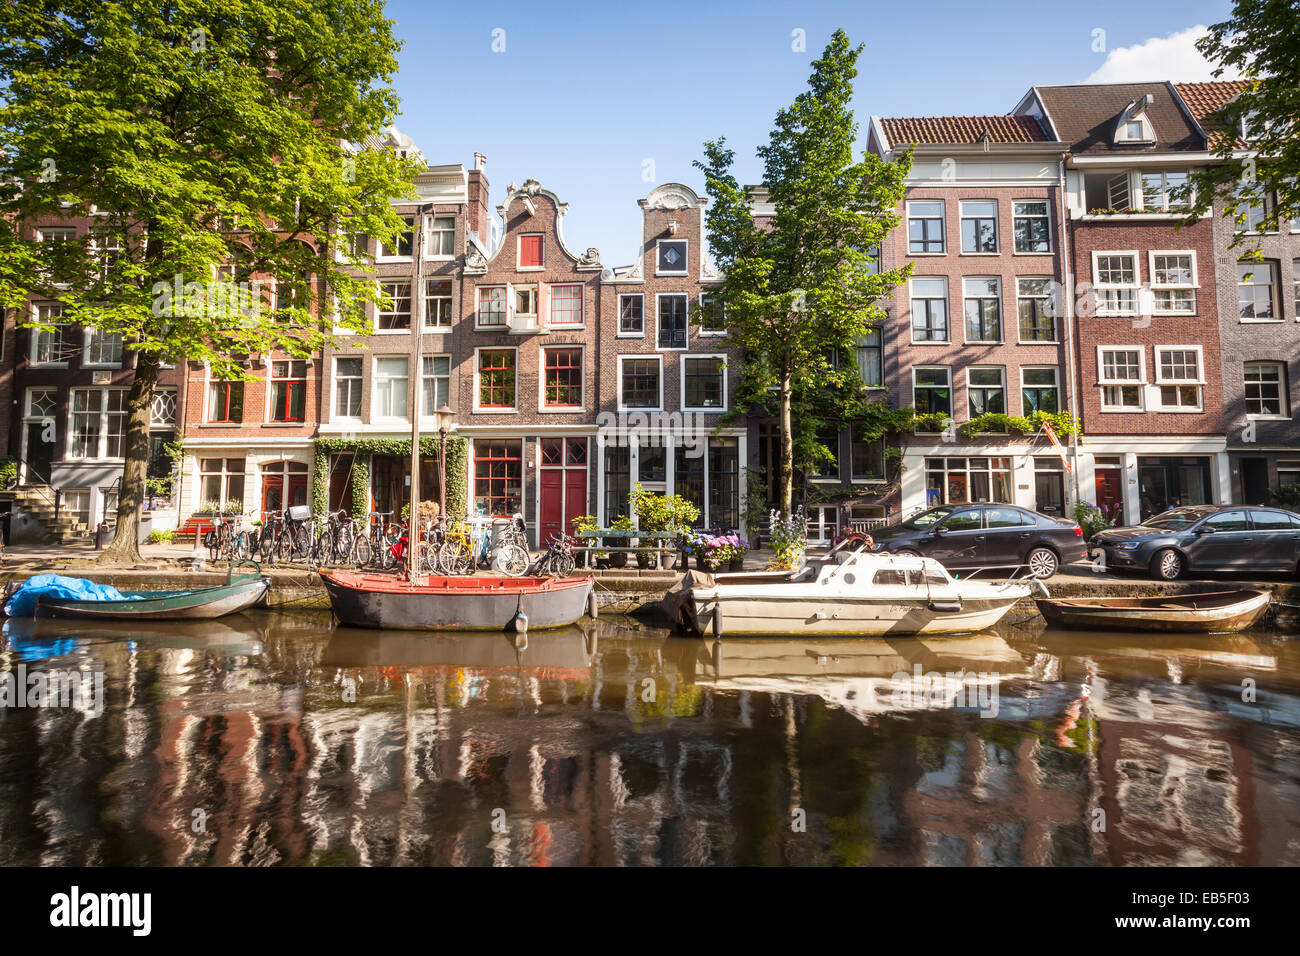 A canal in Amsterdam, Netherlands. The canals of central Amsterdam have been designated a World Heritage Siye by UNESCO. Stock Photo